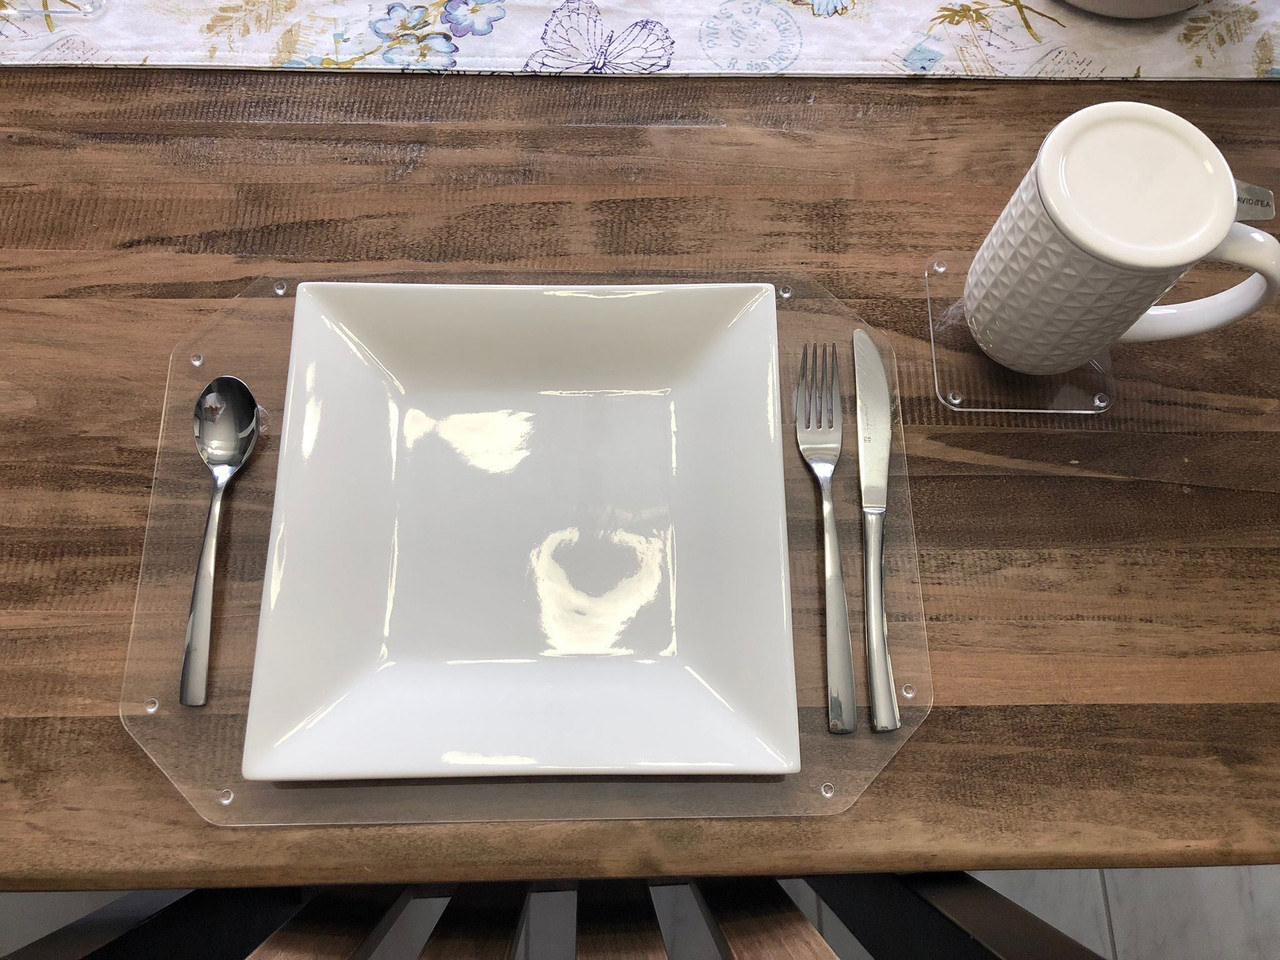 DistinctAndUnique Clear Acrylic Place Mats and Coasters - 3 mm. Non-Slip,  Waterproof Lucite Plexiglass Protector Placemats